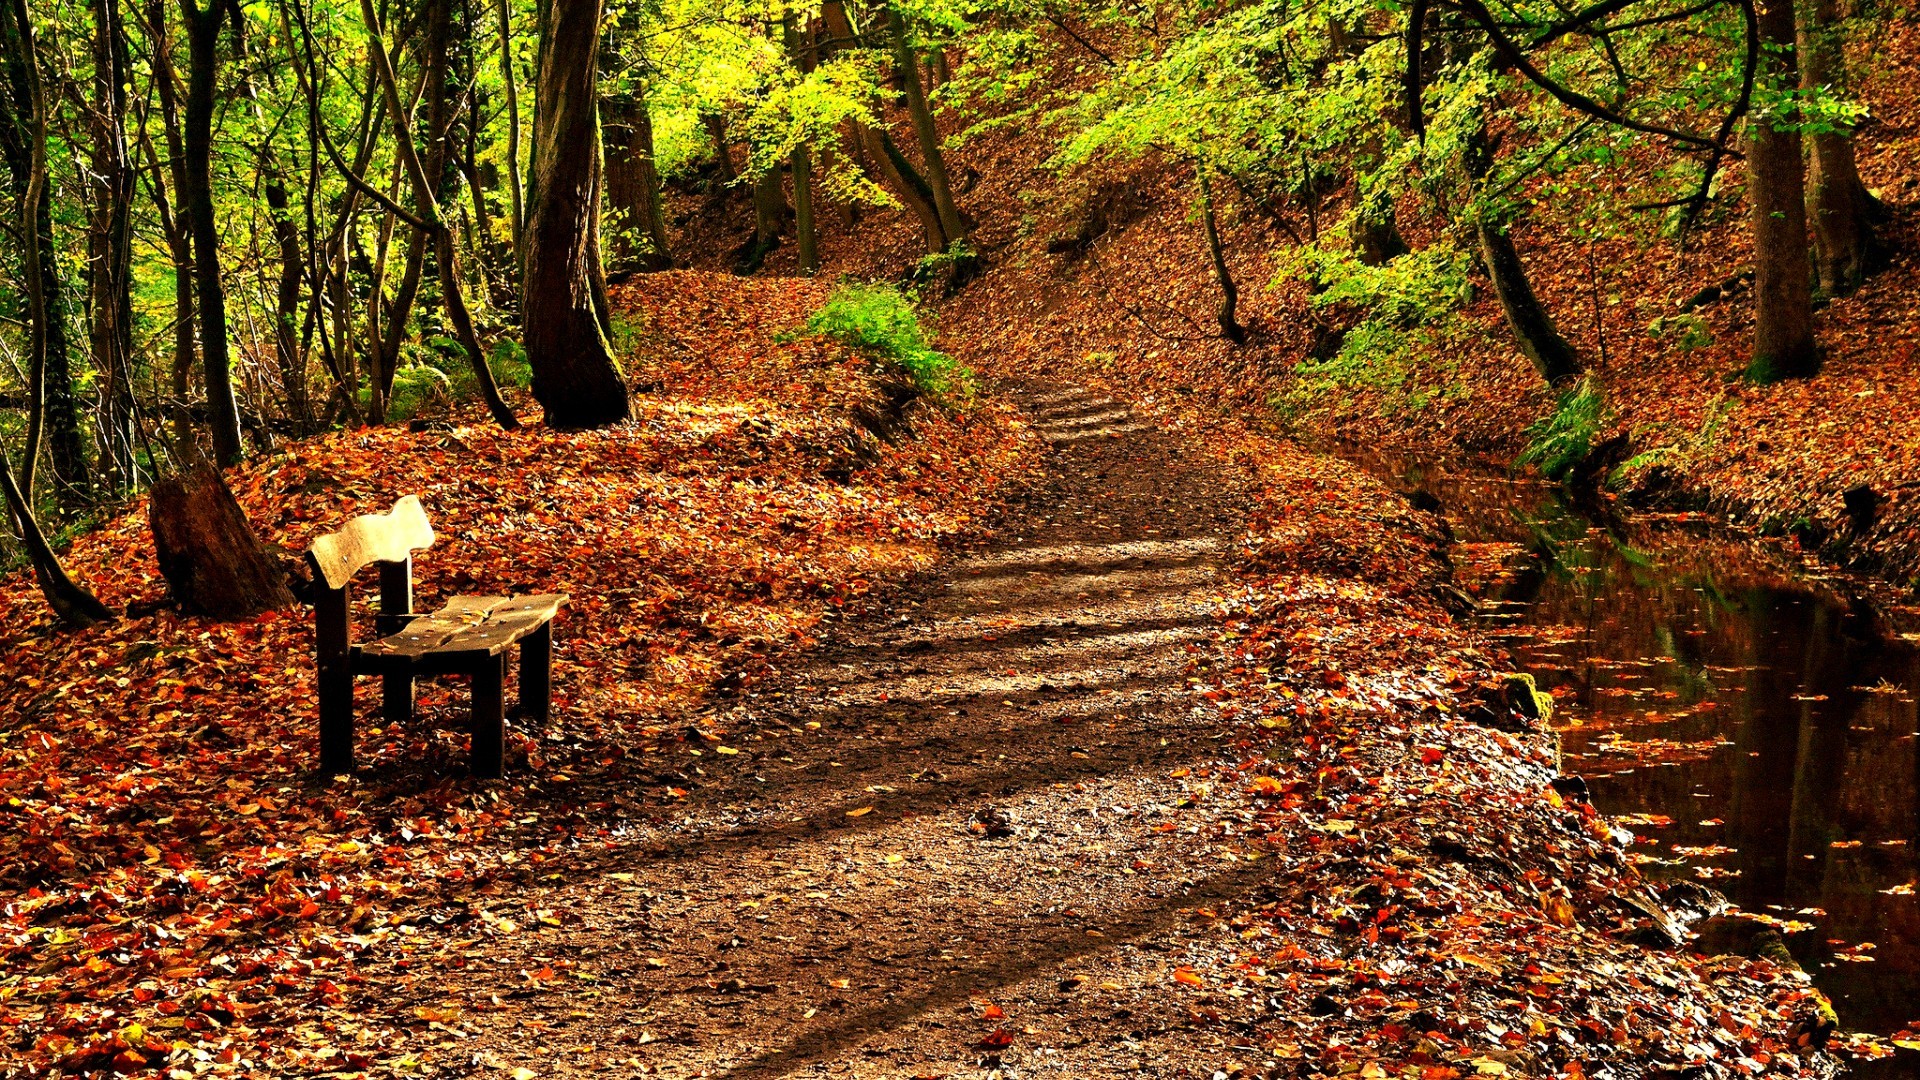 General 1920x1080 forest fallen leaves path bench creeks outdoors